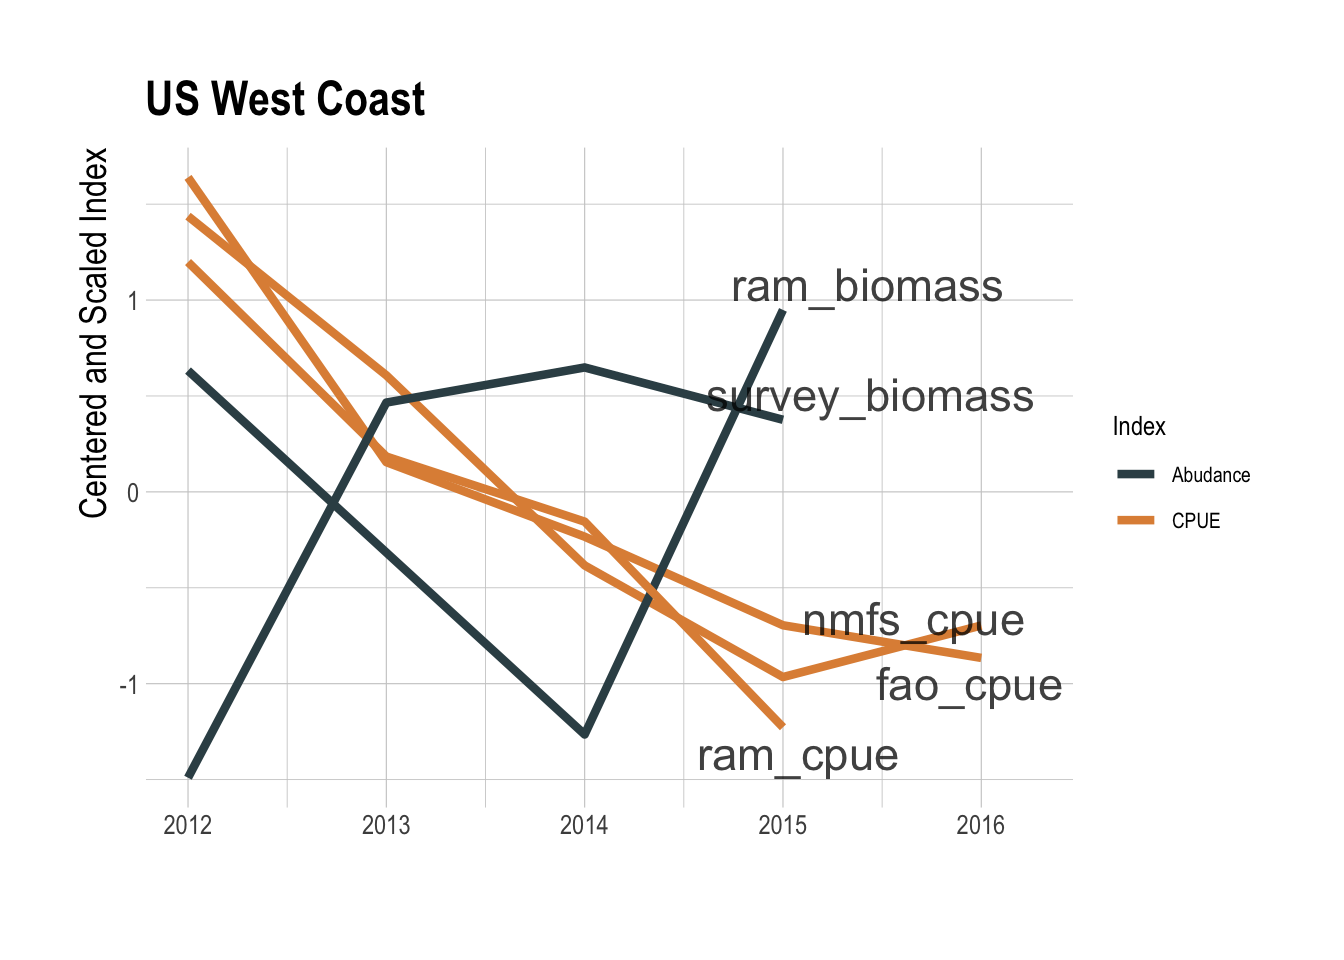 GFW derived CPUE (orange) and abundance indices (black) for the US West Coast